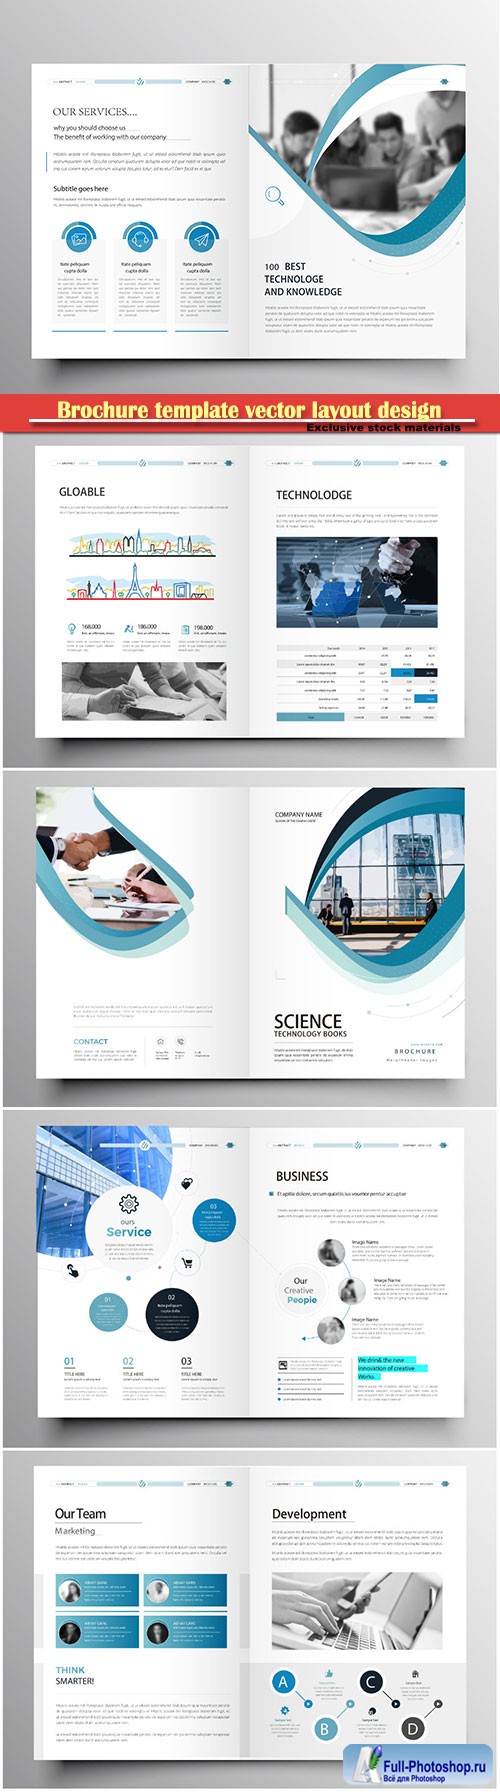 Brochure template vector layout design, corporate business annual report, magazine, flyer mockup # 178